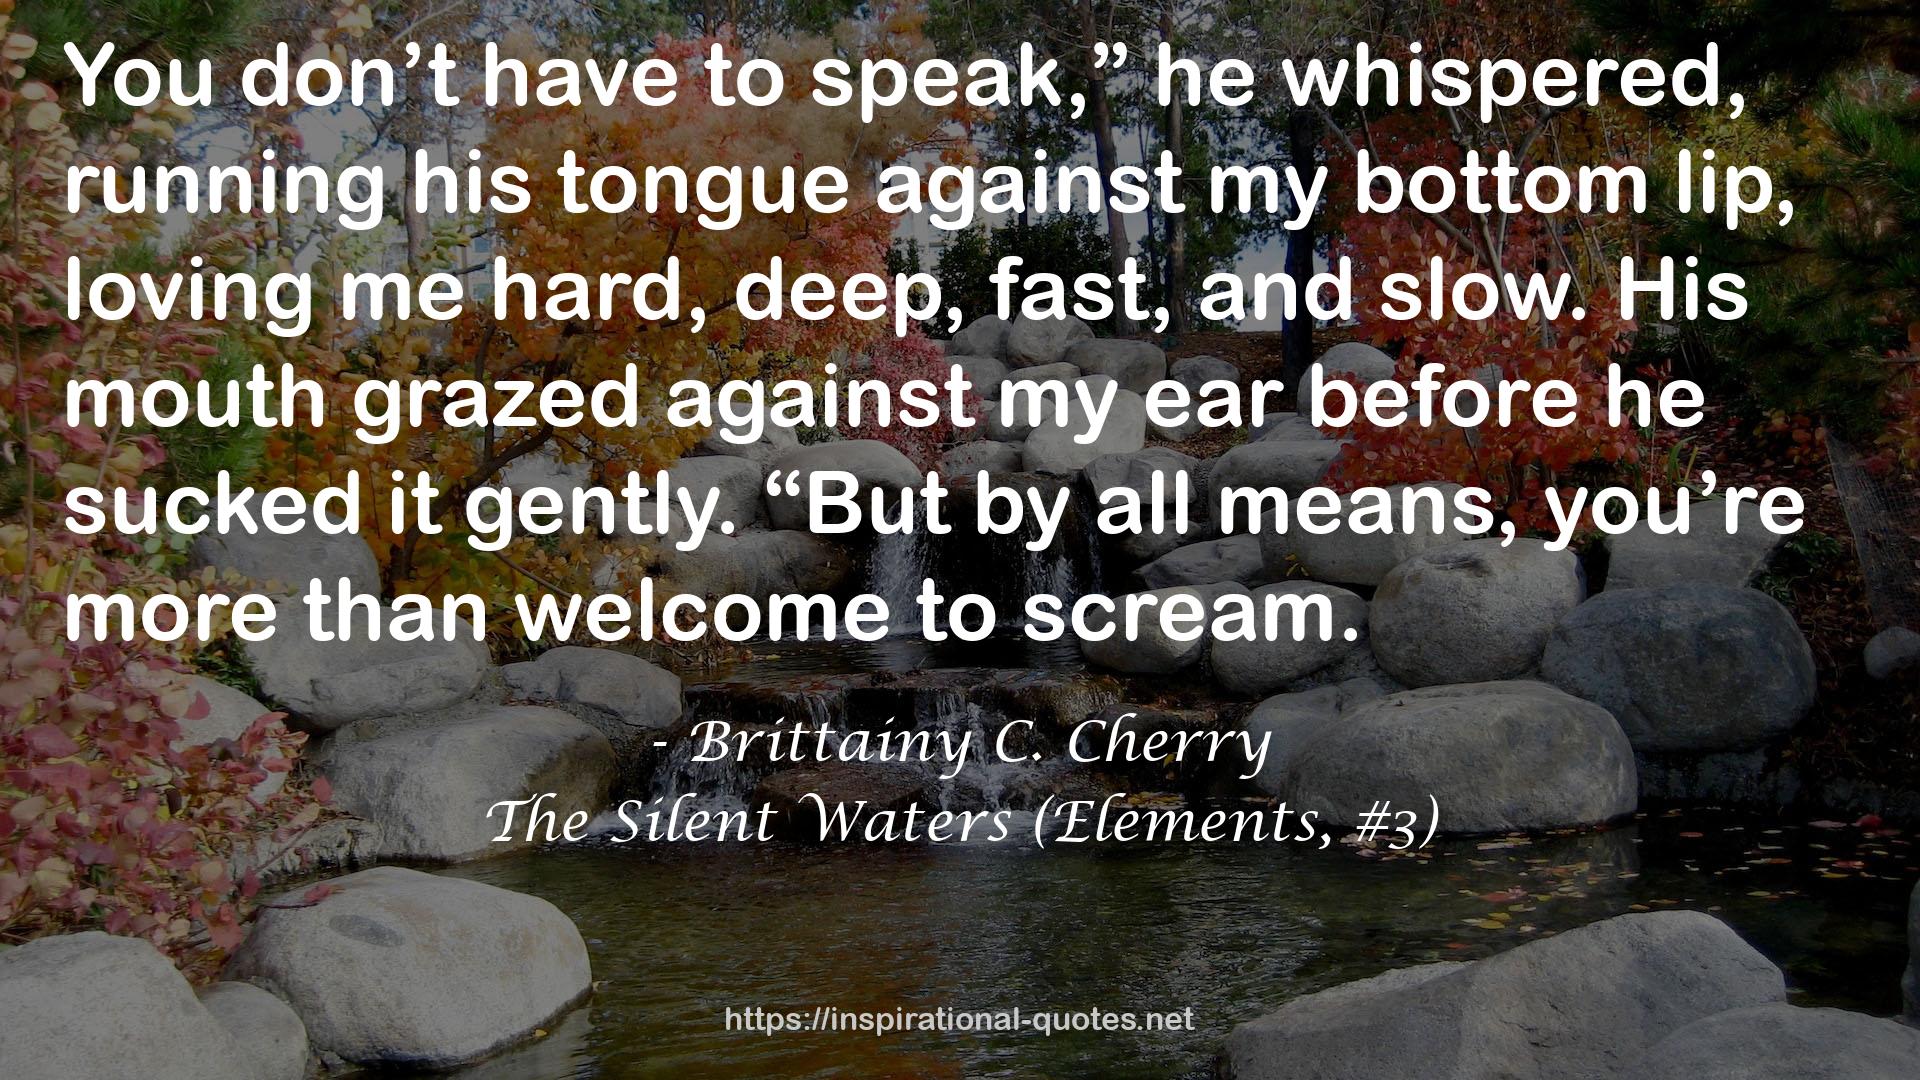 The Silent Waters (Elements, #3) QUOTES